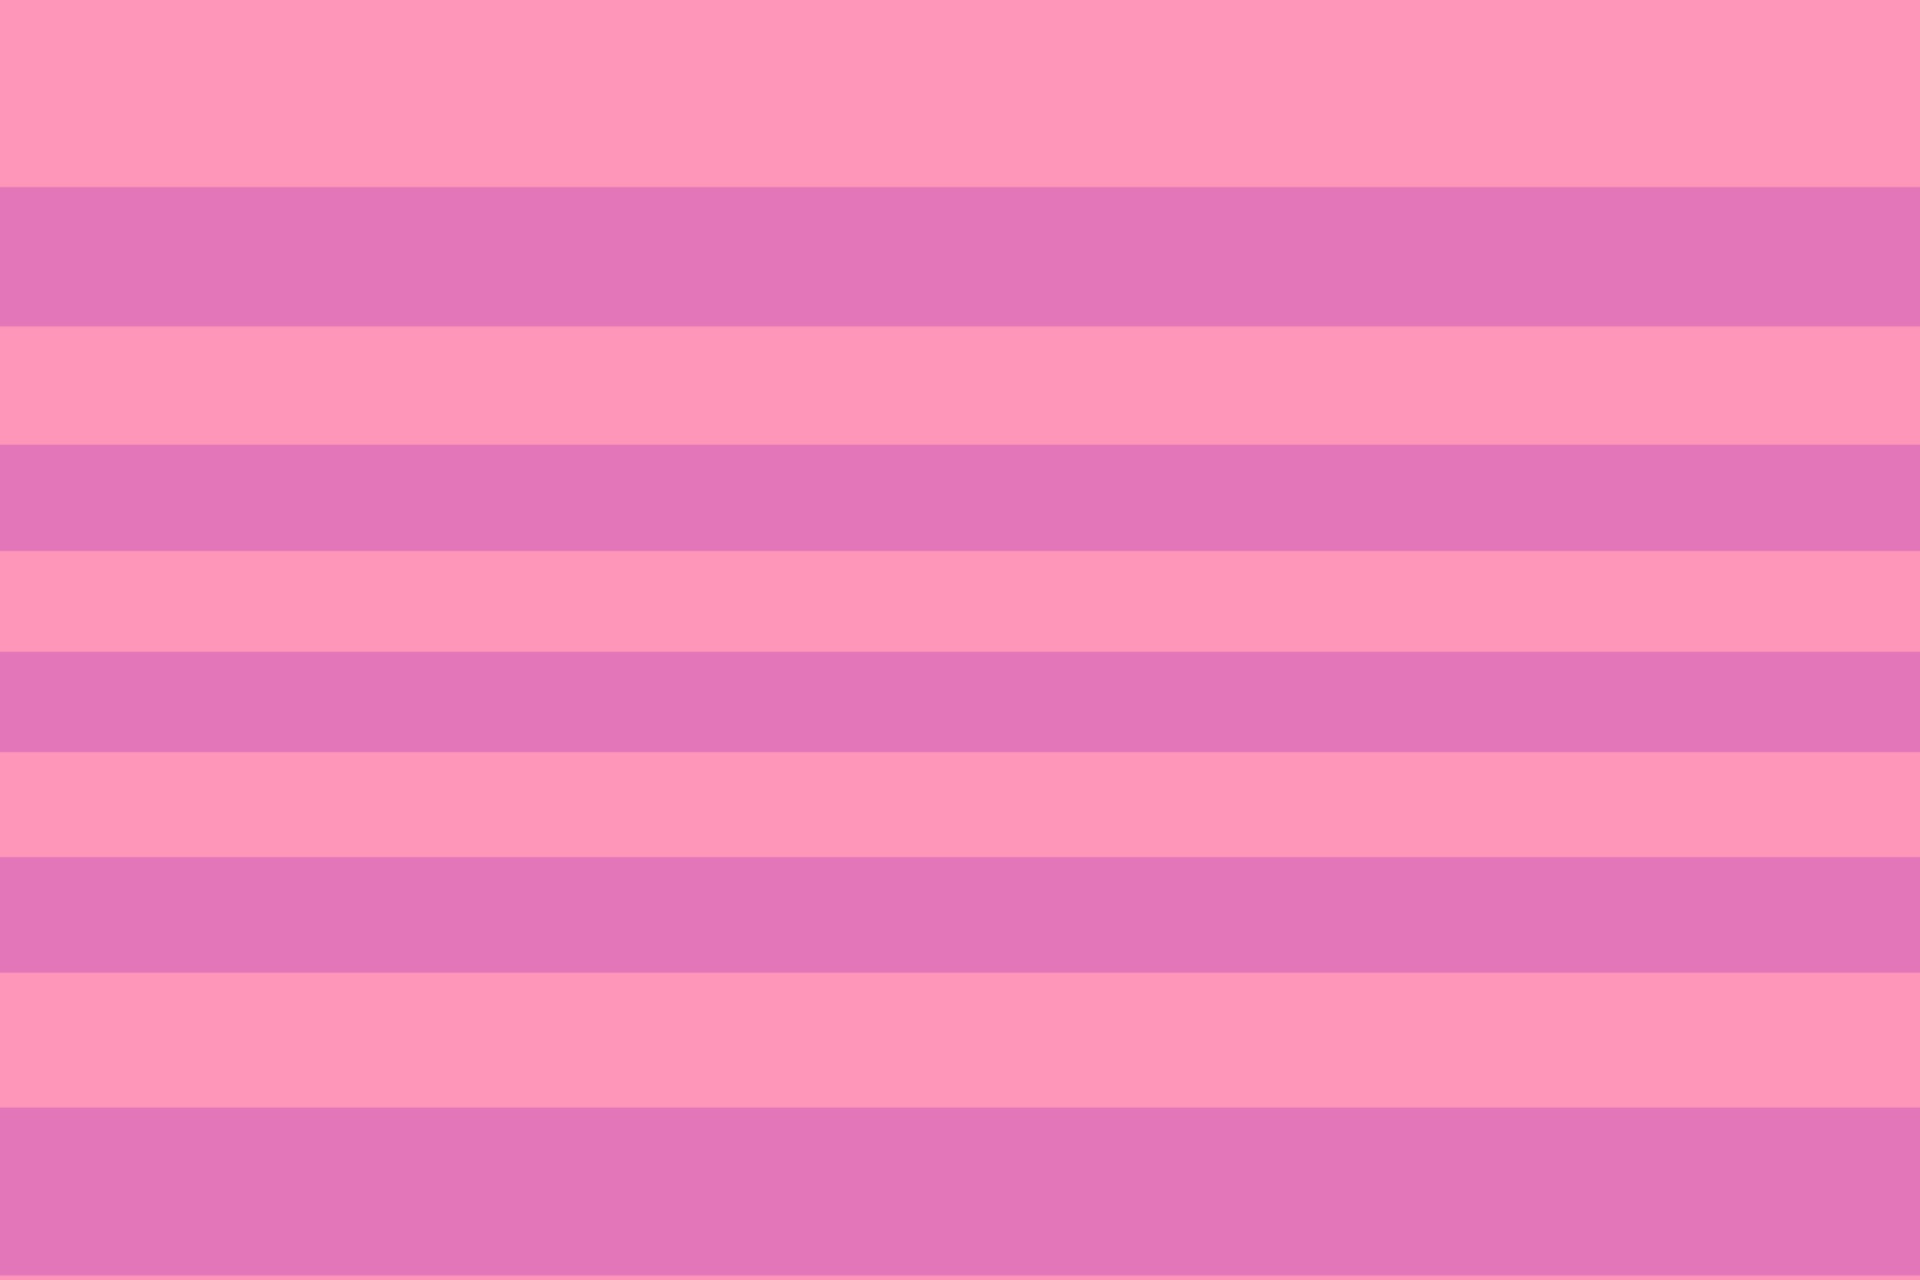 Pink And Lavender Stripes